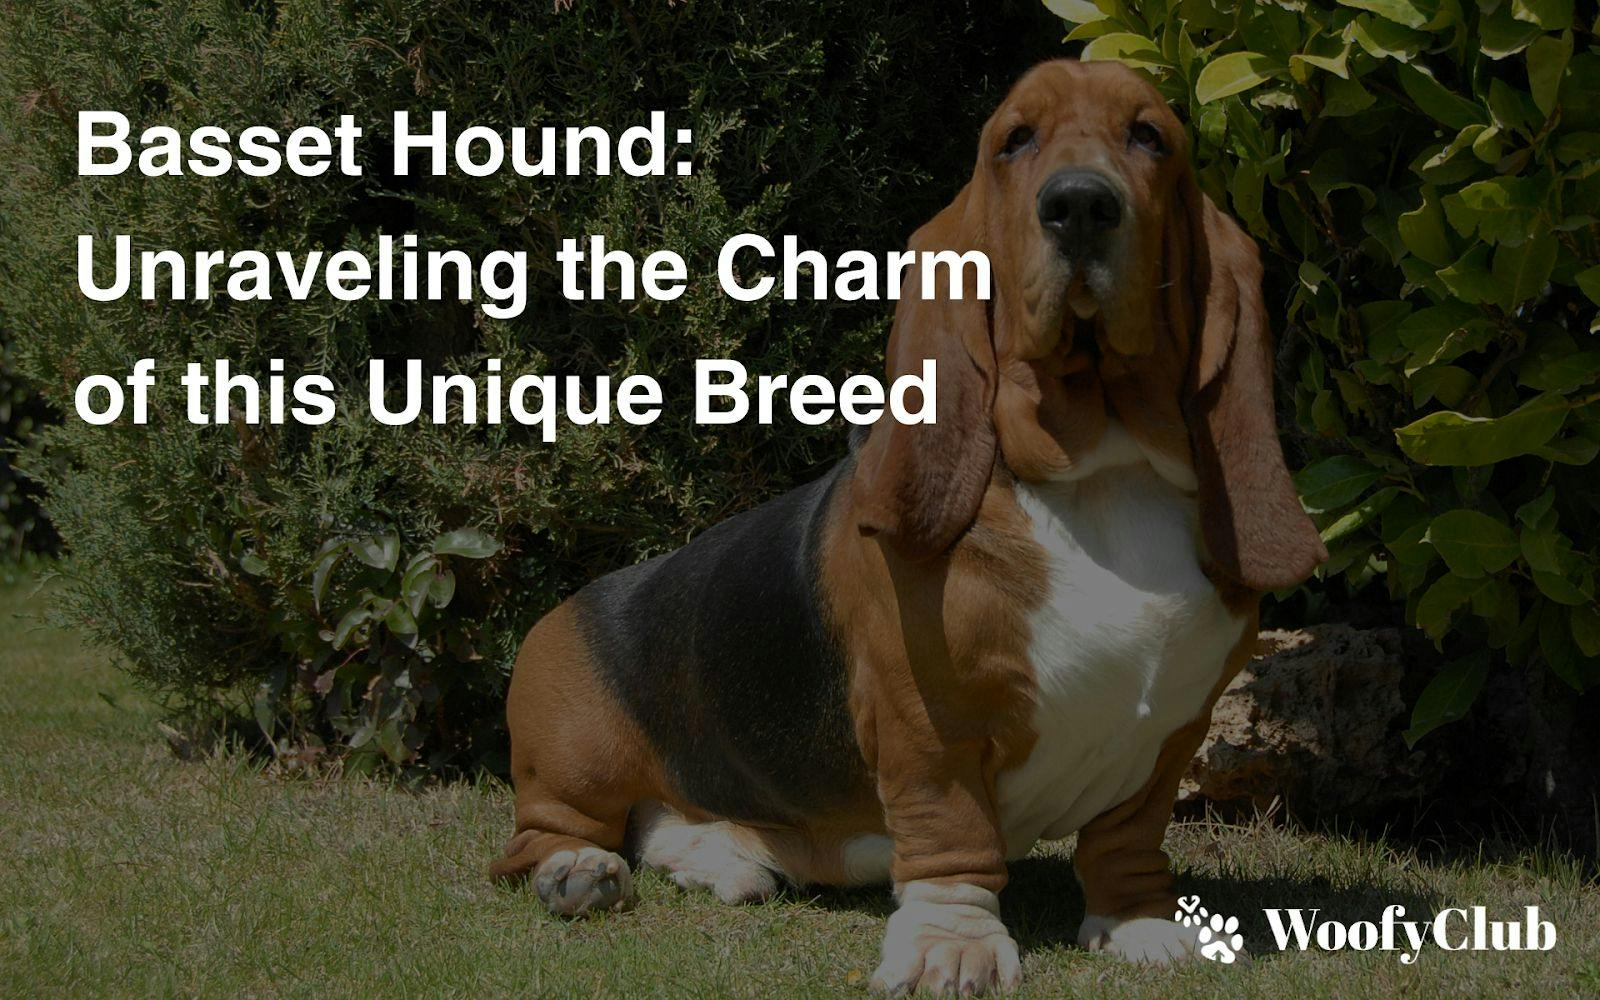 Basset Hound: Unraveling The Charm Of This Unique Breed